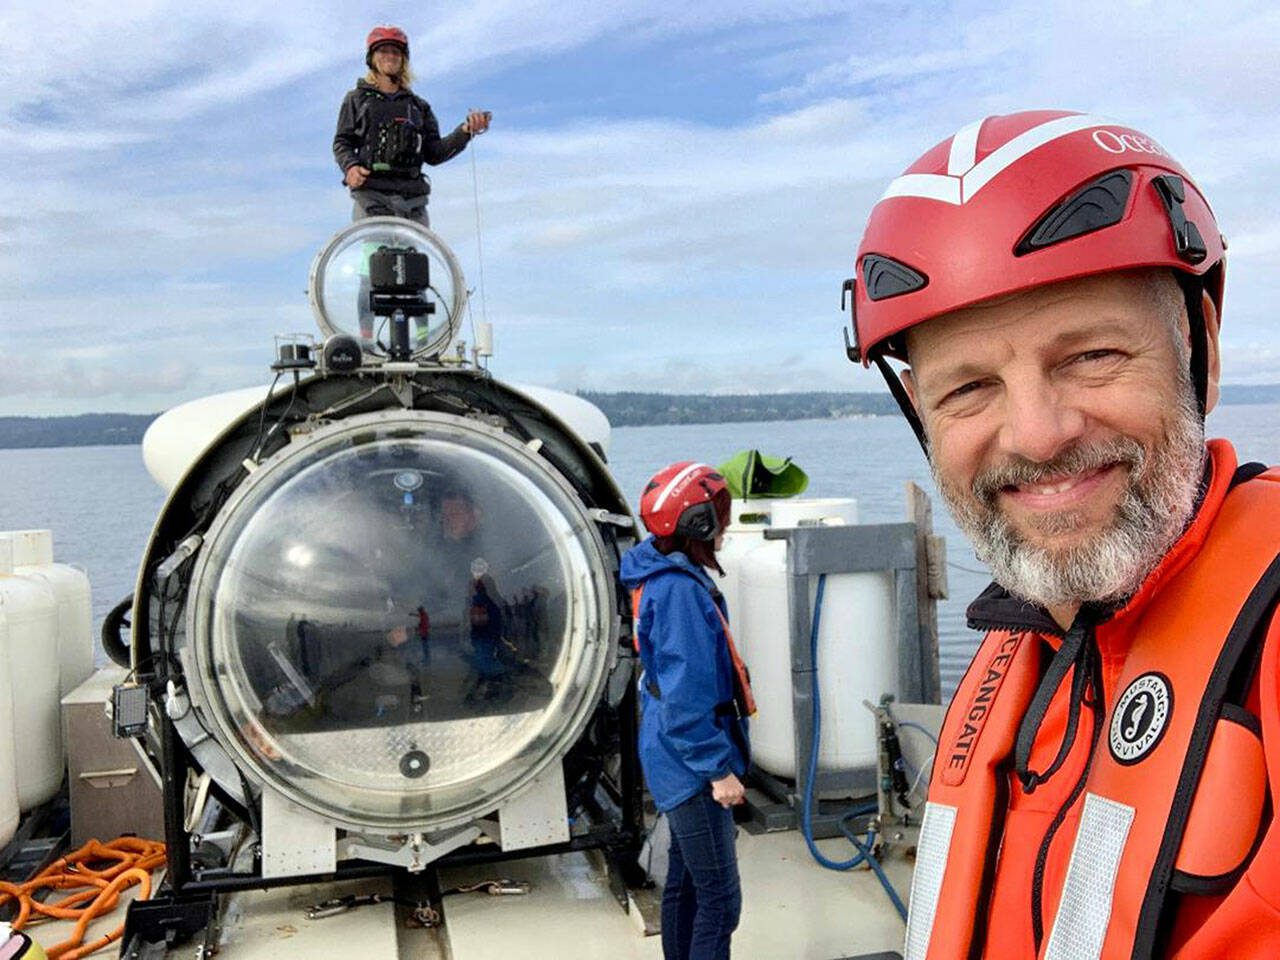 John Lundin went on a 90-minute test dive to the bottom of the Sound in 2019 on the OceanGate submersible Cyclops as an invited guest. Lundin owns Bluewater Organic Distilling and was a business neighbor and friend to OceanGate and CEO Stockton Rush. (Photo courtesy John Lundin)